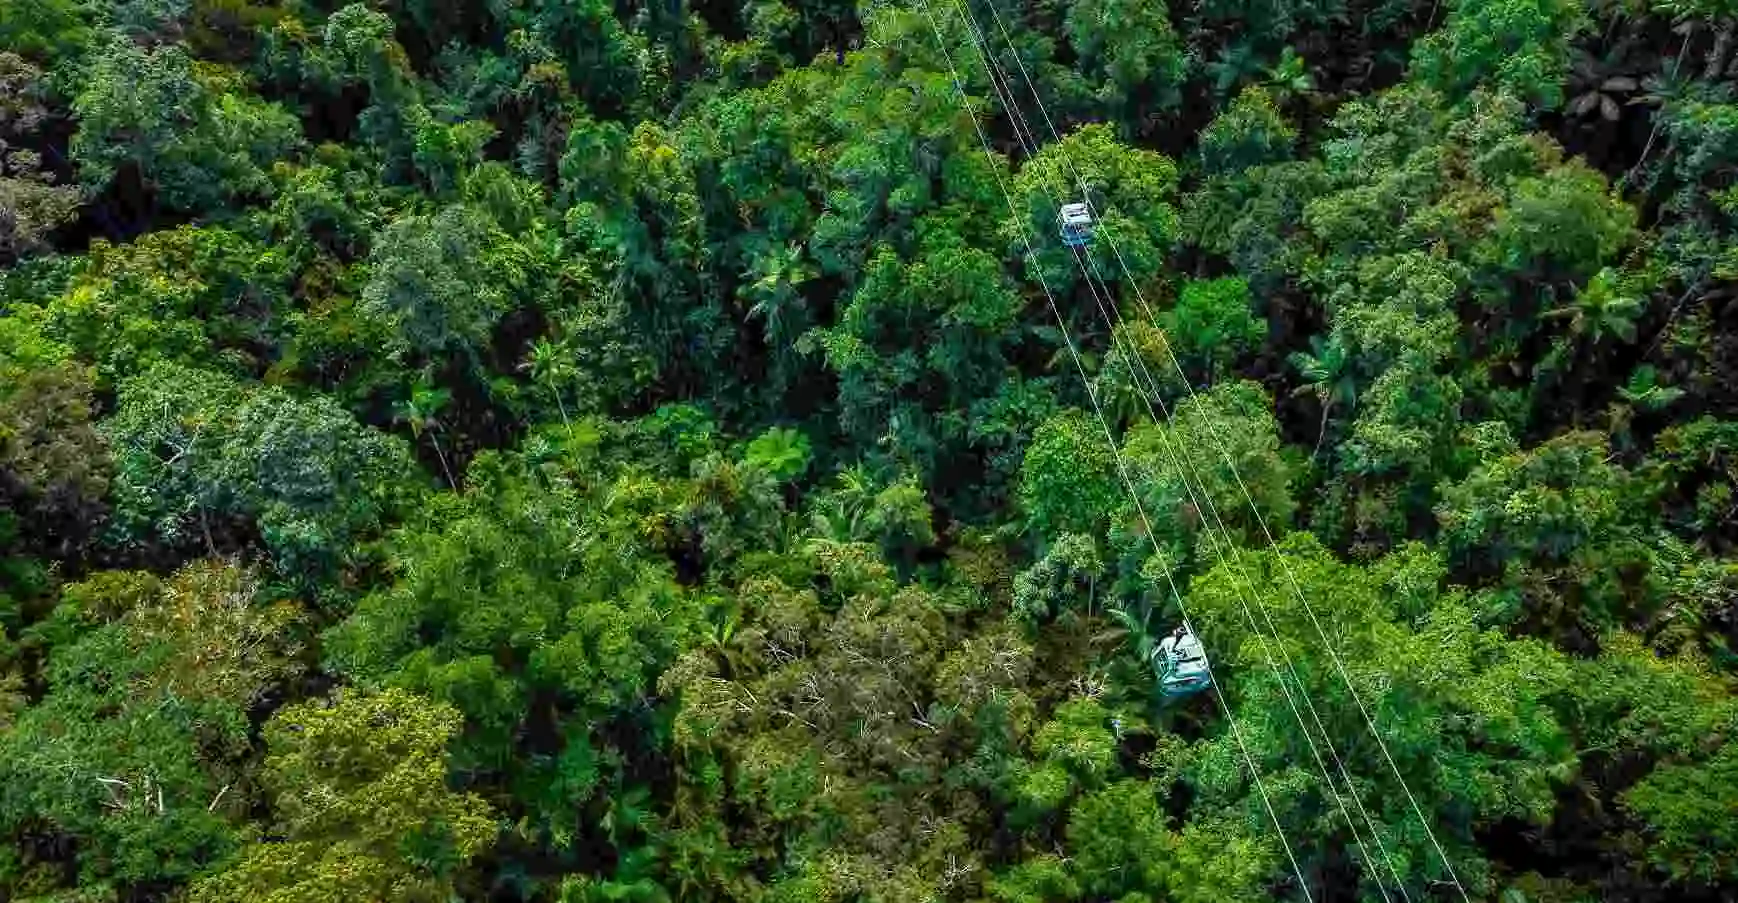 A birds eye view of the rainforest canopy with a cableway across the top and two gondolas passing by